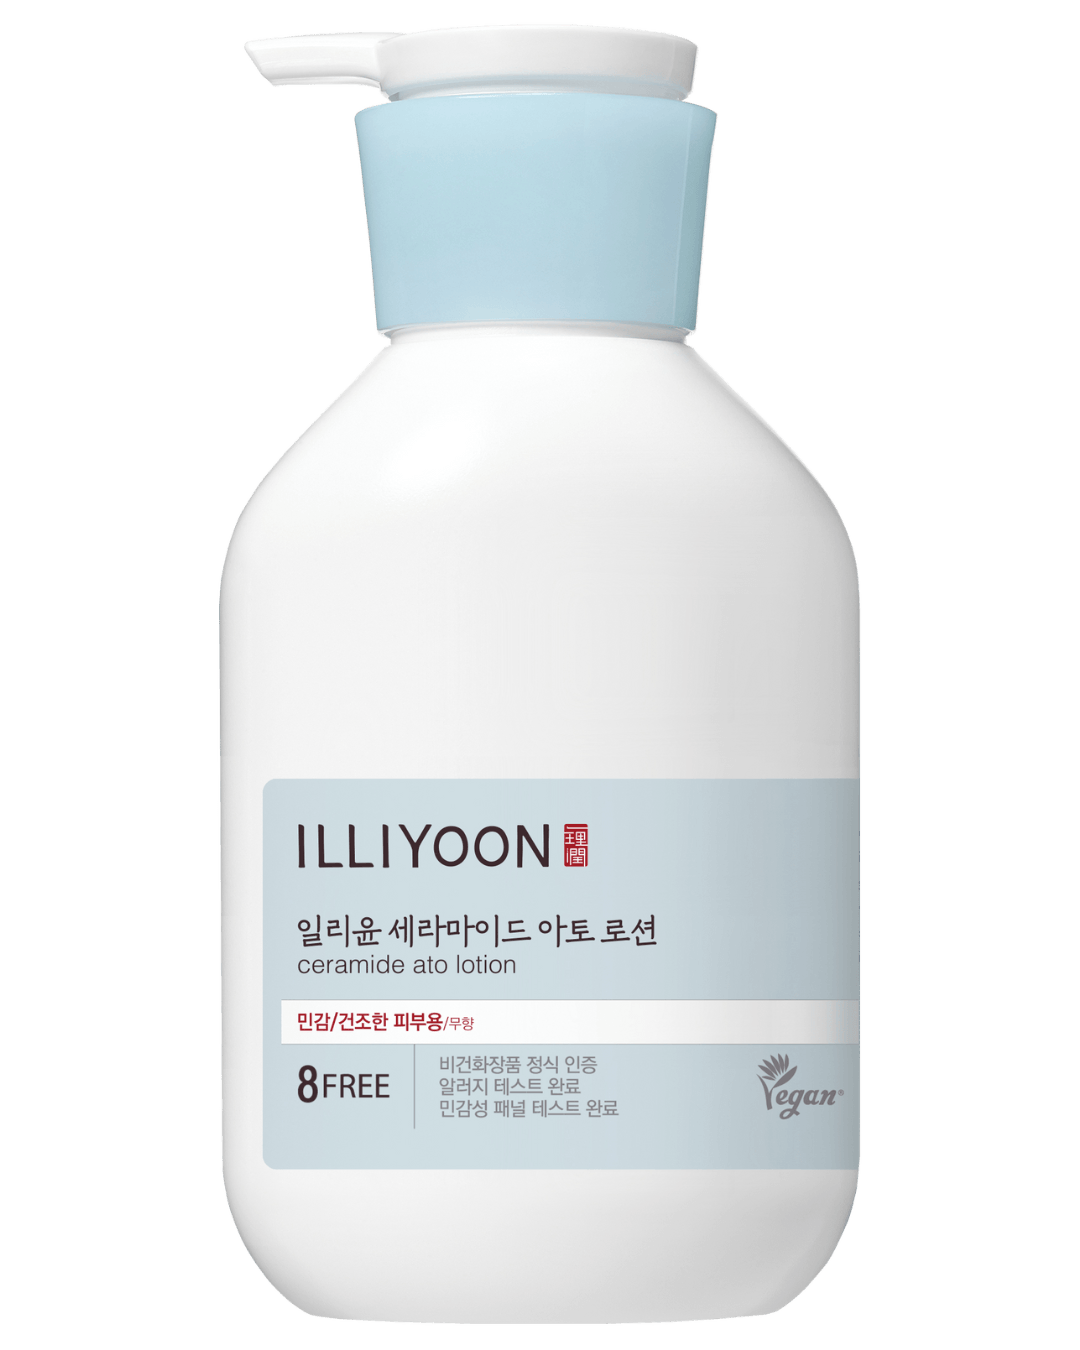 Daily Vanity Beauty Awards 2024 Best Mens care Illiyoon Ceramide Ato Lotion for Body &#038; Face Voted By Beauty Experts